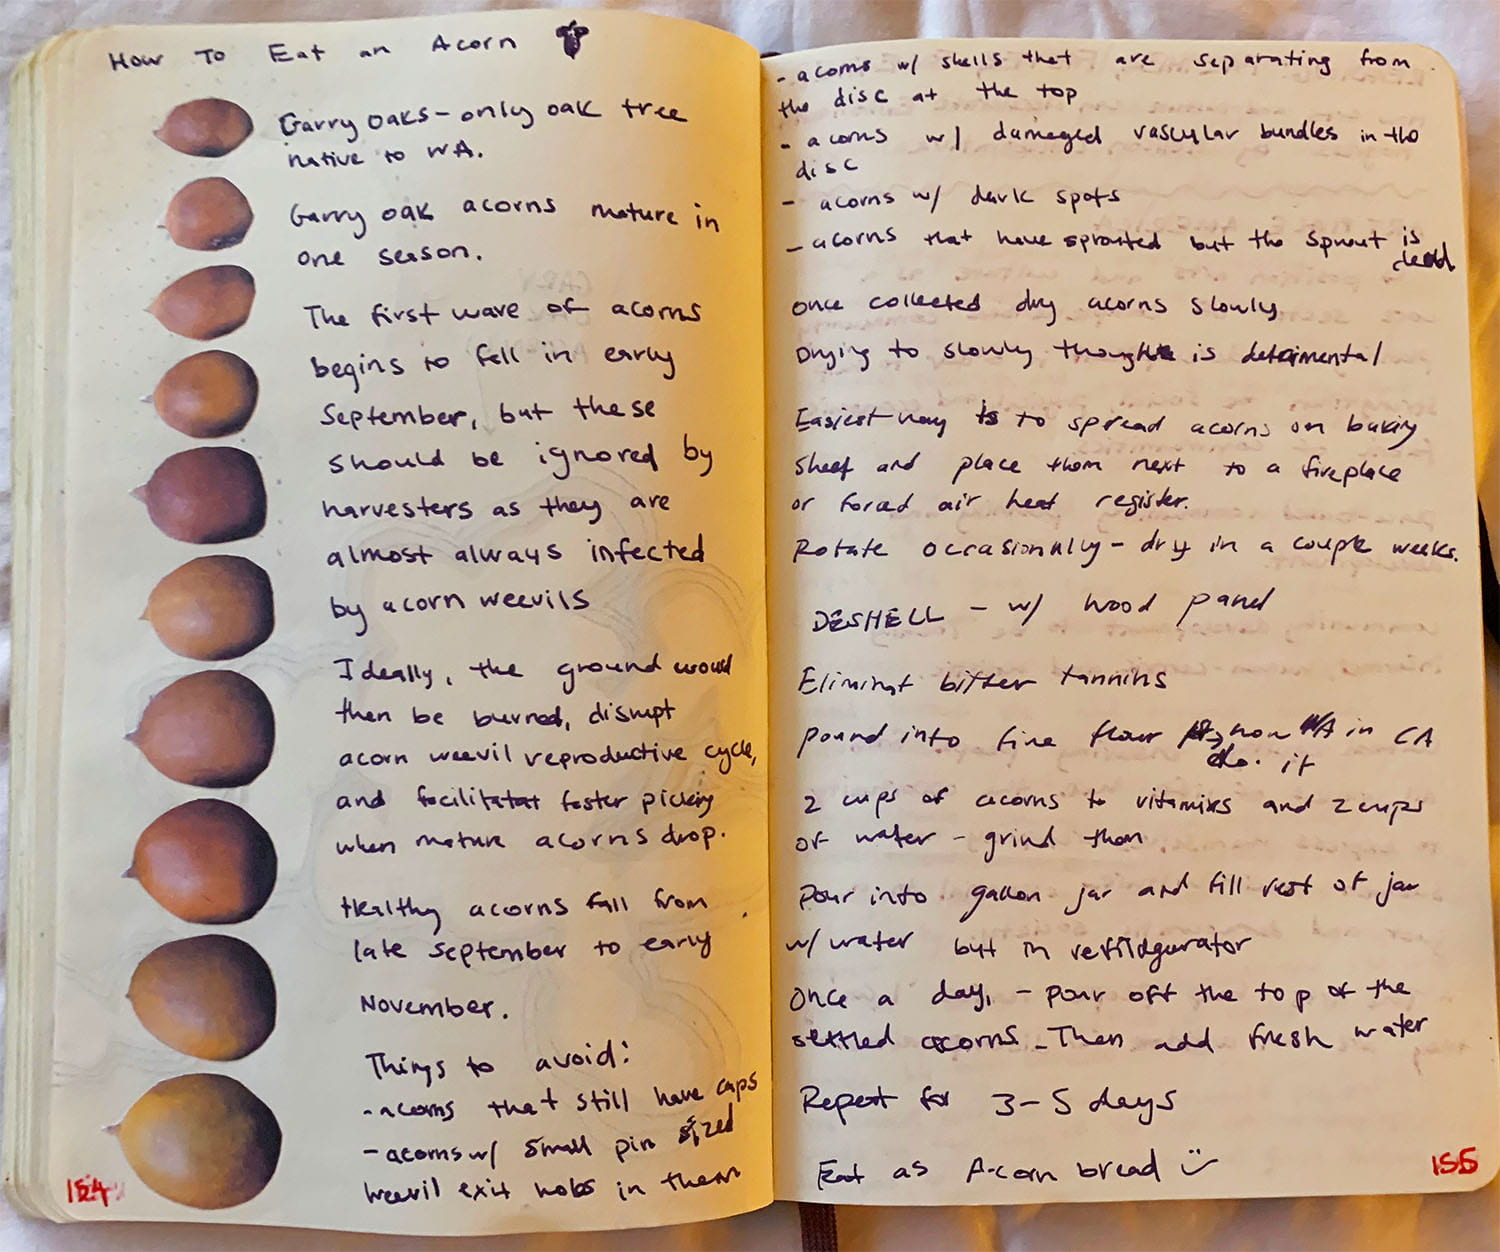 Journal entry titled "How to eat an acorn" showing a line-up of acorns and notes about identifying and harvesting ready acorns